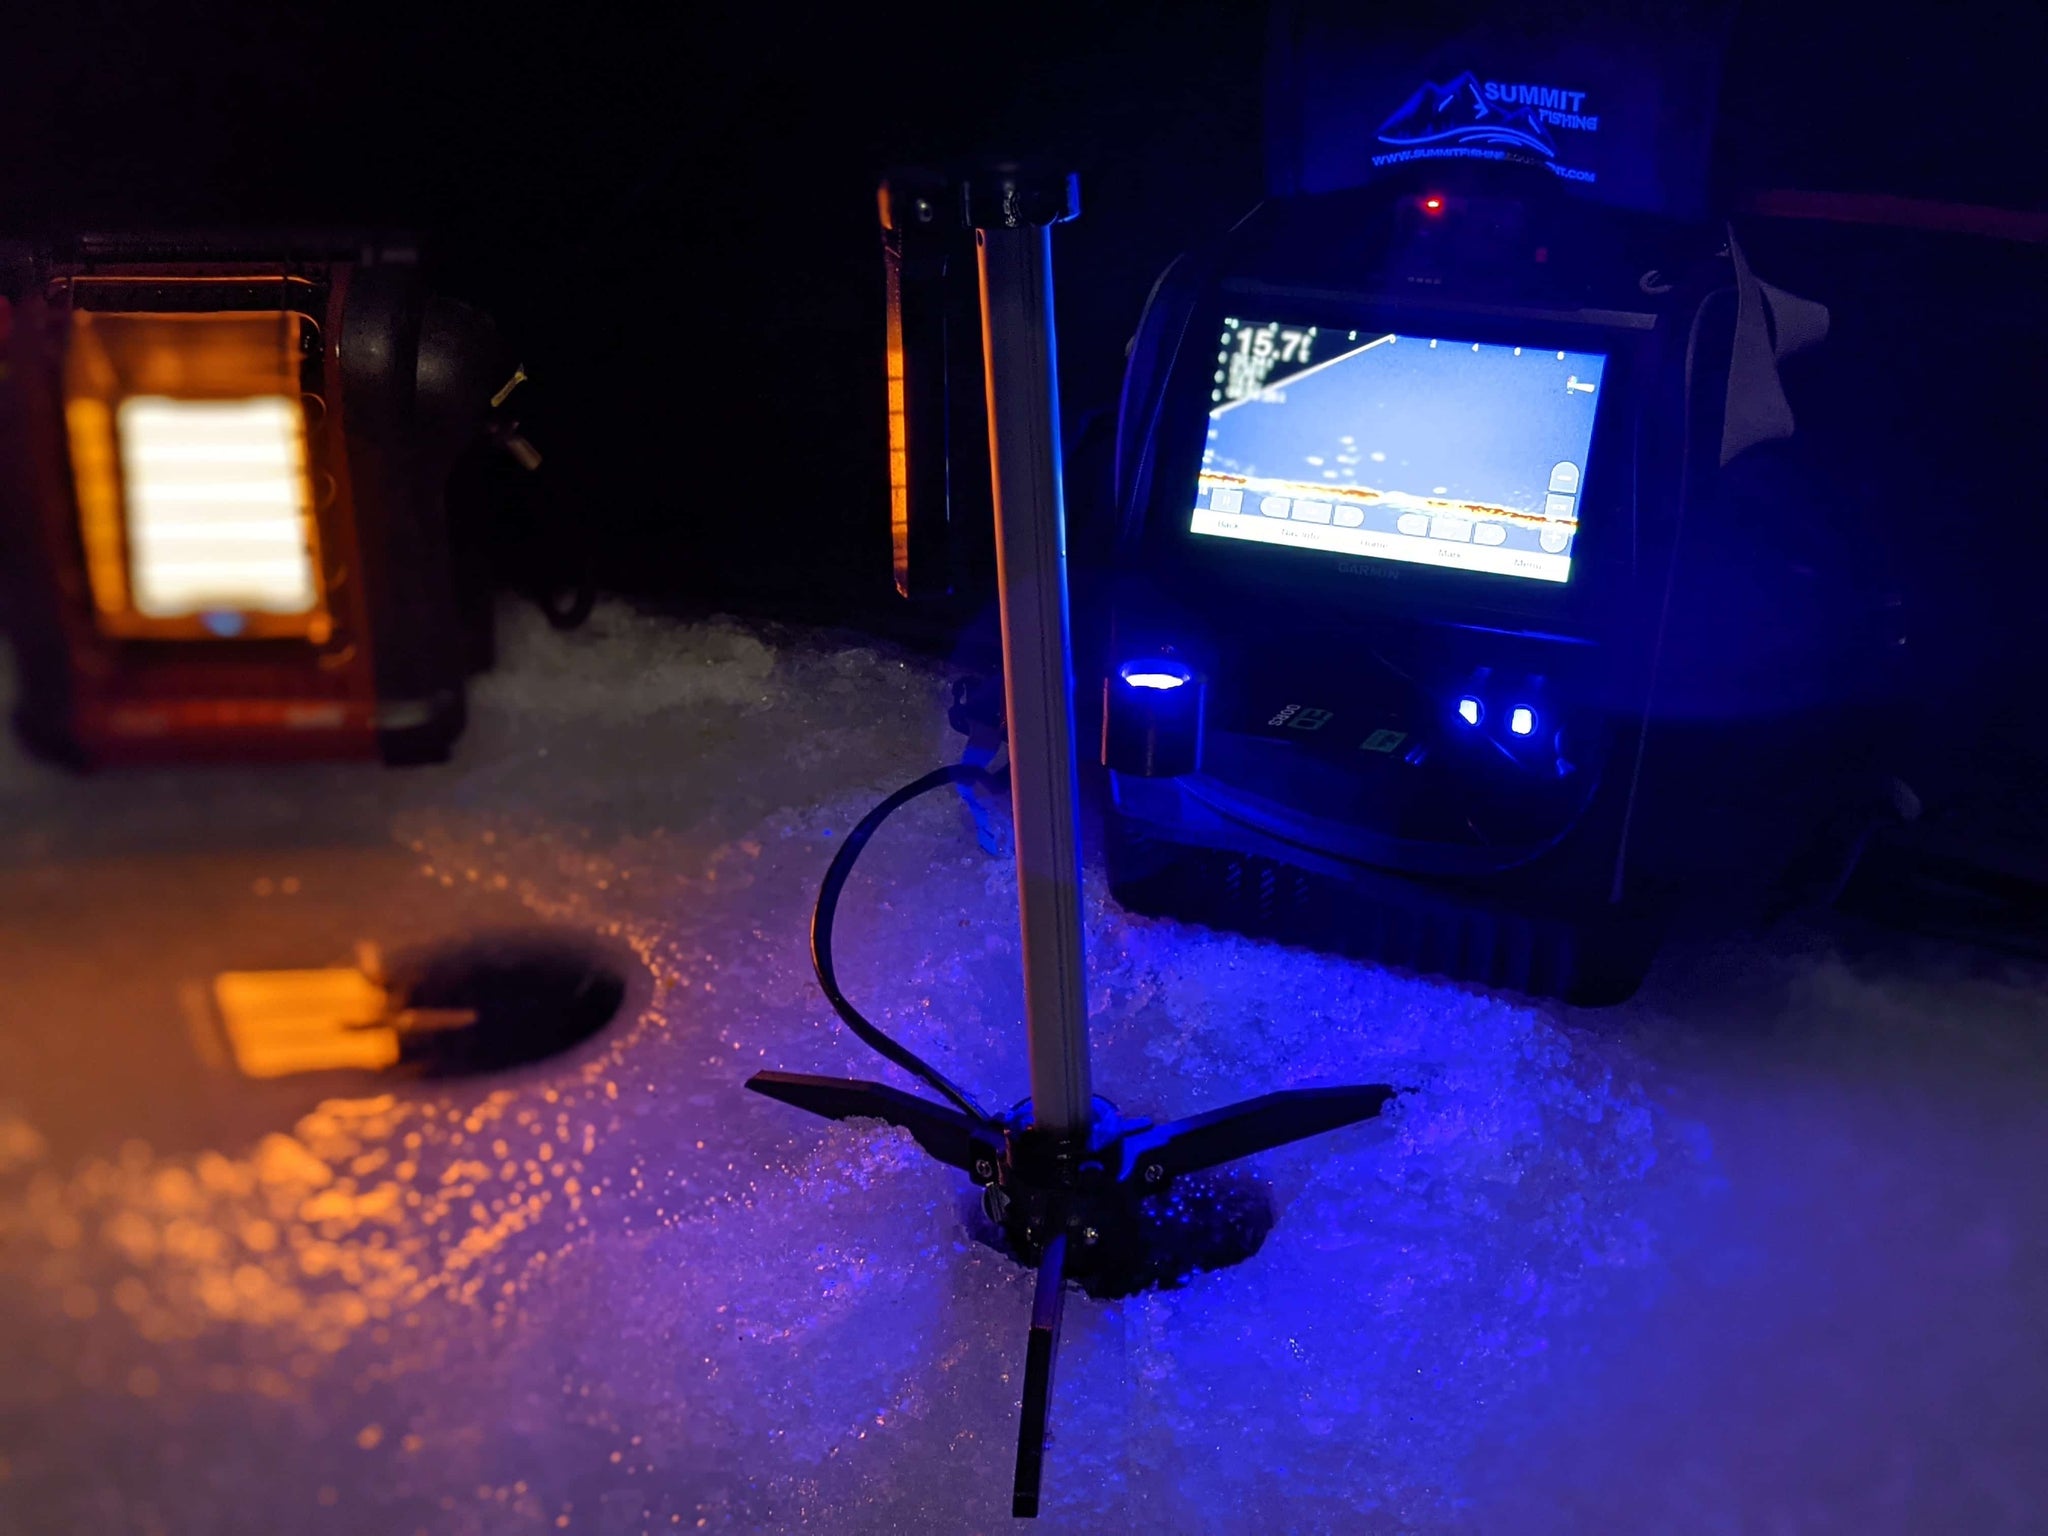 How to Ice Fish with a Heater